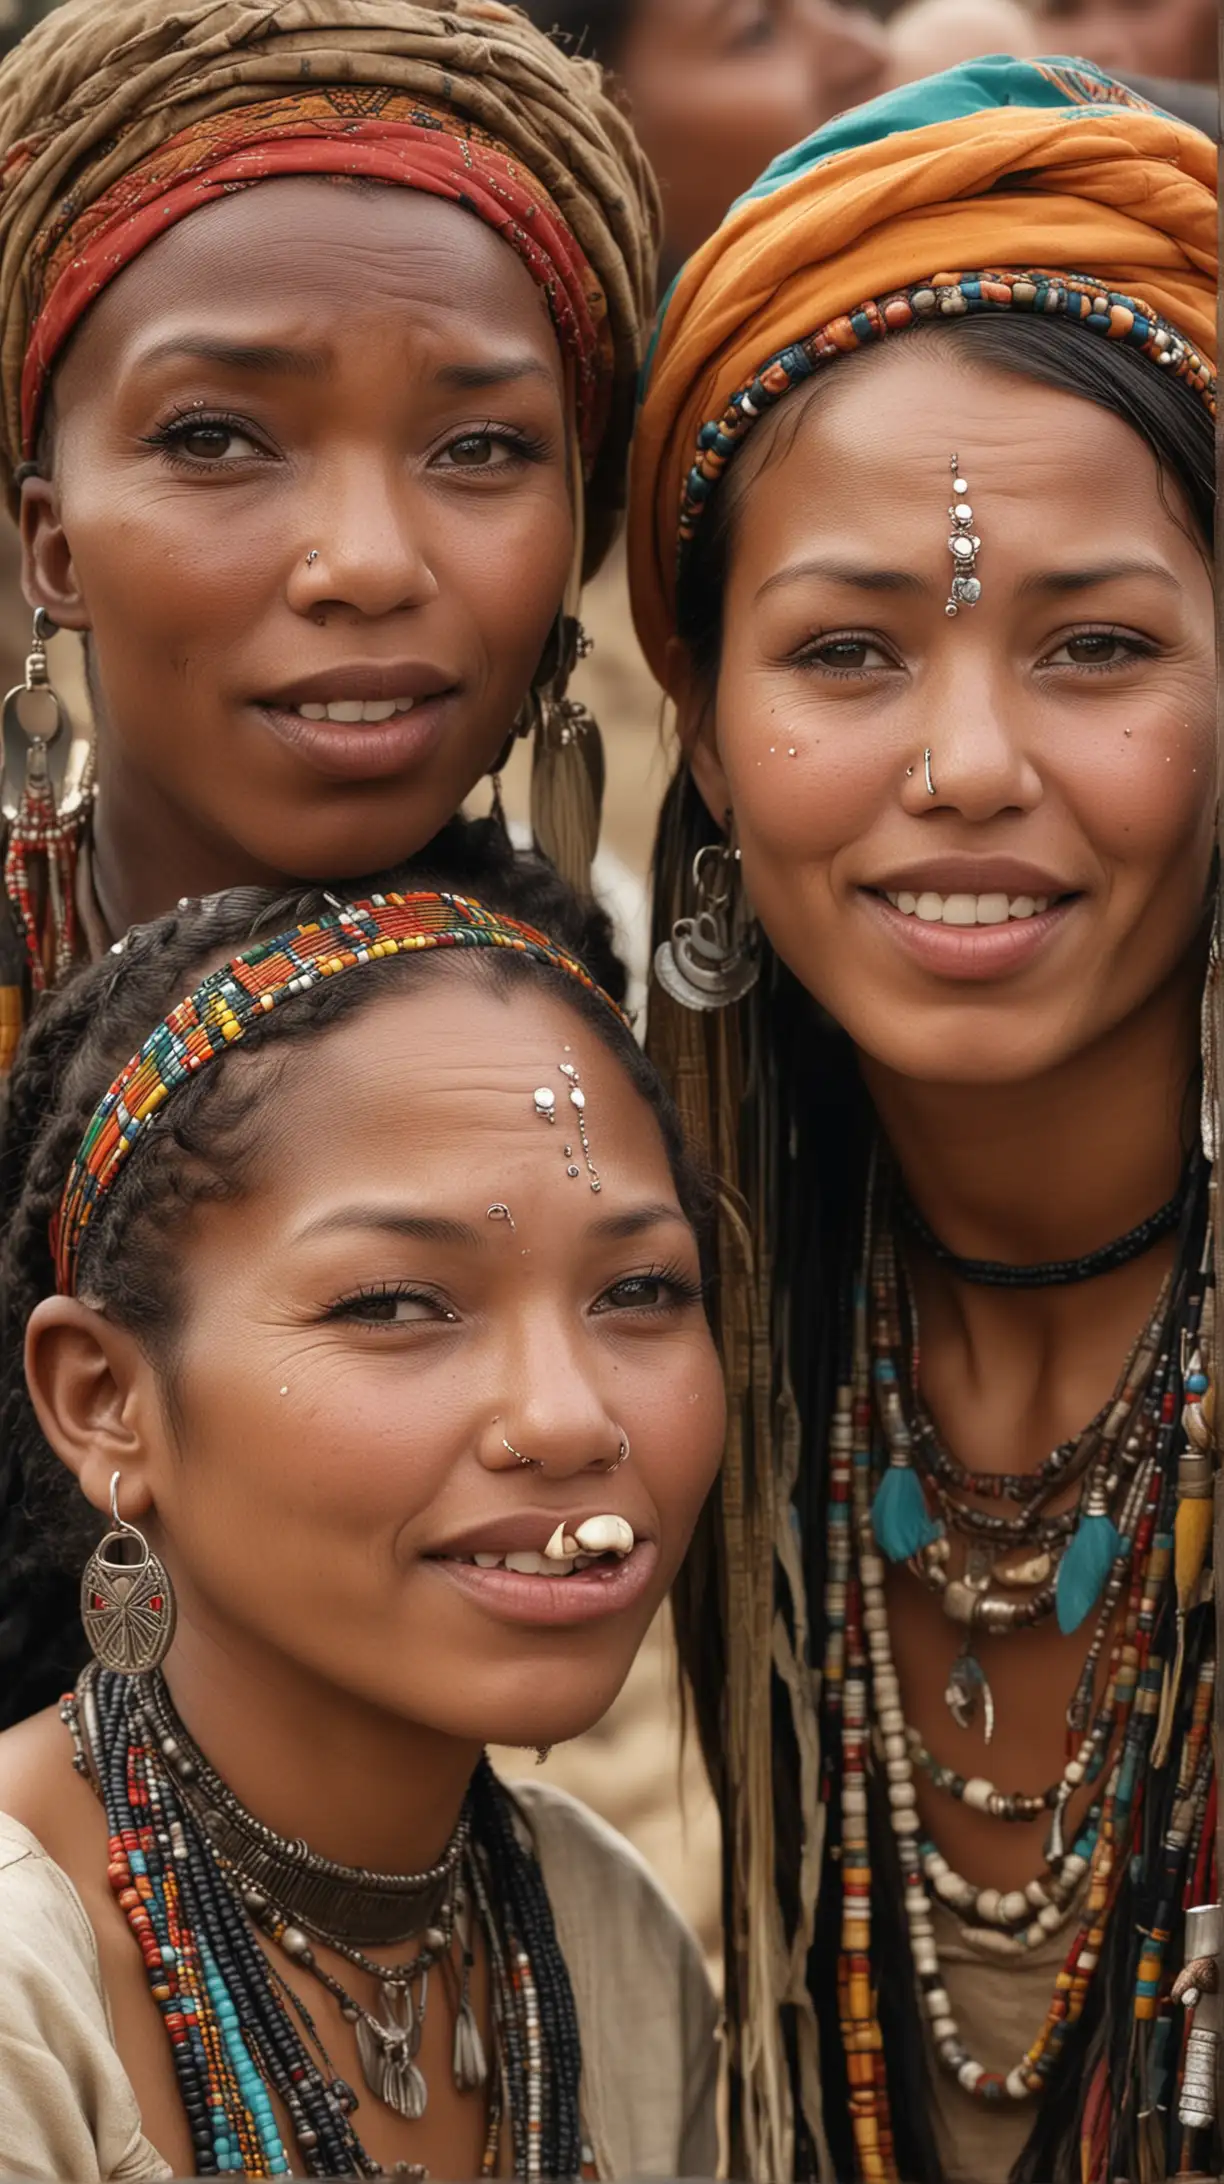 Depict a lively village gathering, where people of all ages come together to celebrate their cultural heritage. Some individuals are shown with lip and ear piercings, emphasizing the practice's significance within the community. africa tribe.Hyper realistic